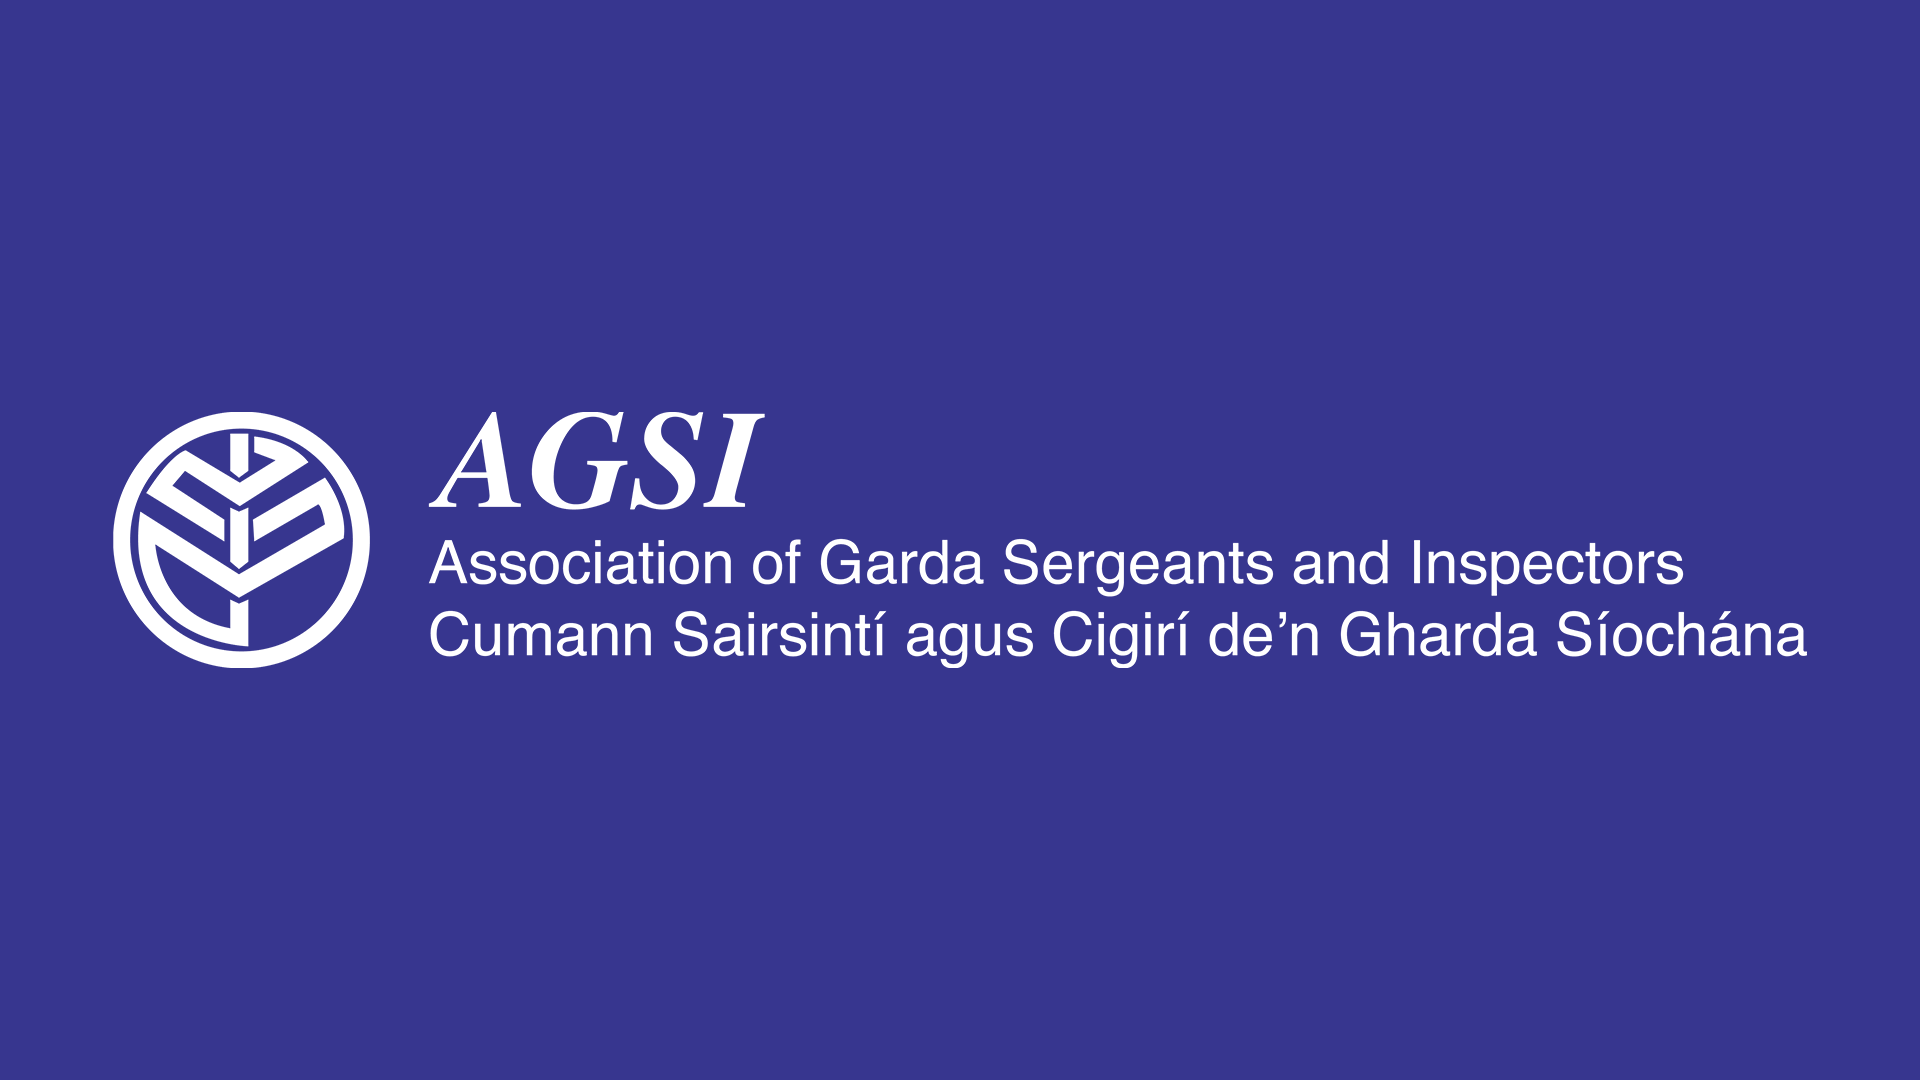 AGSI Call for Review of Policing Authority Internal Complaints’ Procedure